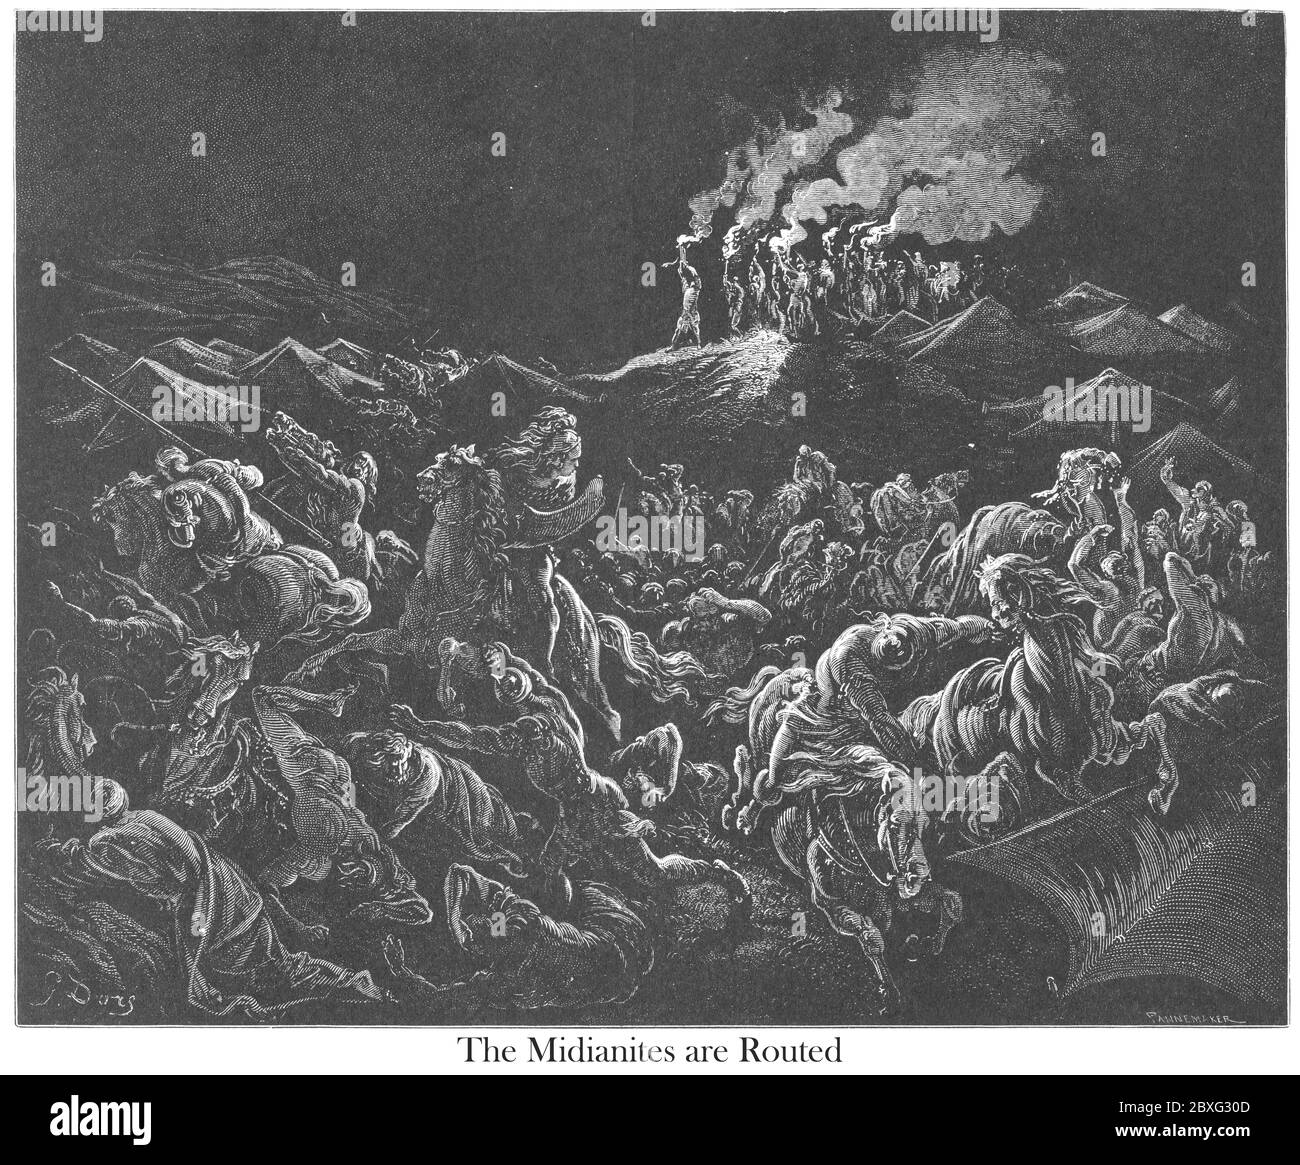 The Midianites are Routed [The Midianites Put to Flight] Judges 7:22-23 From the book 'Bible Gallery' Illustrated by Gustave Dore with Memoir of Dore and Descriptive Letter-press by Talbot W. Chambers D.D. Published by Cassell & Company Limited in London and simultaneously by Mame in Tours, France in 1866 Stock Photo